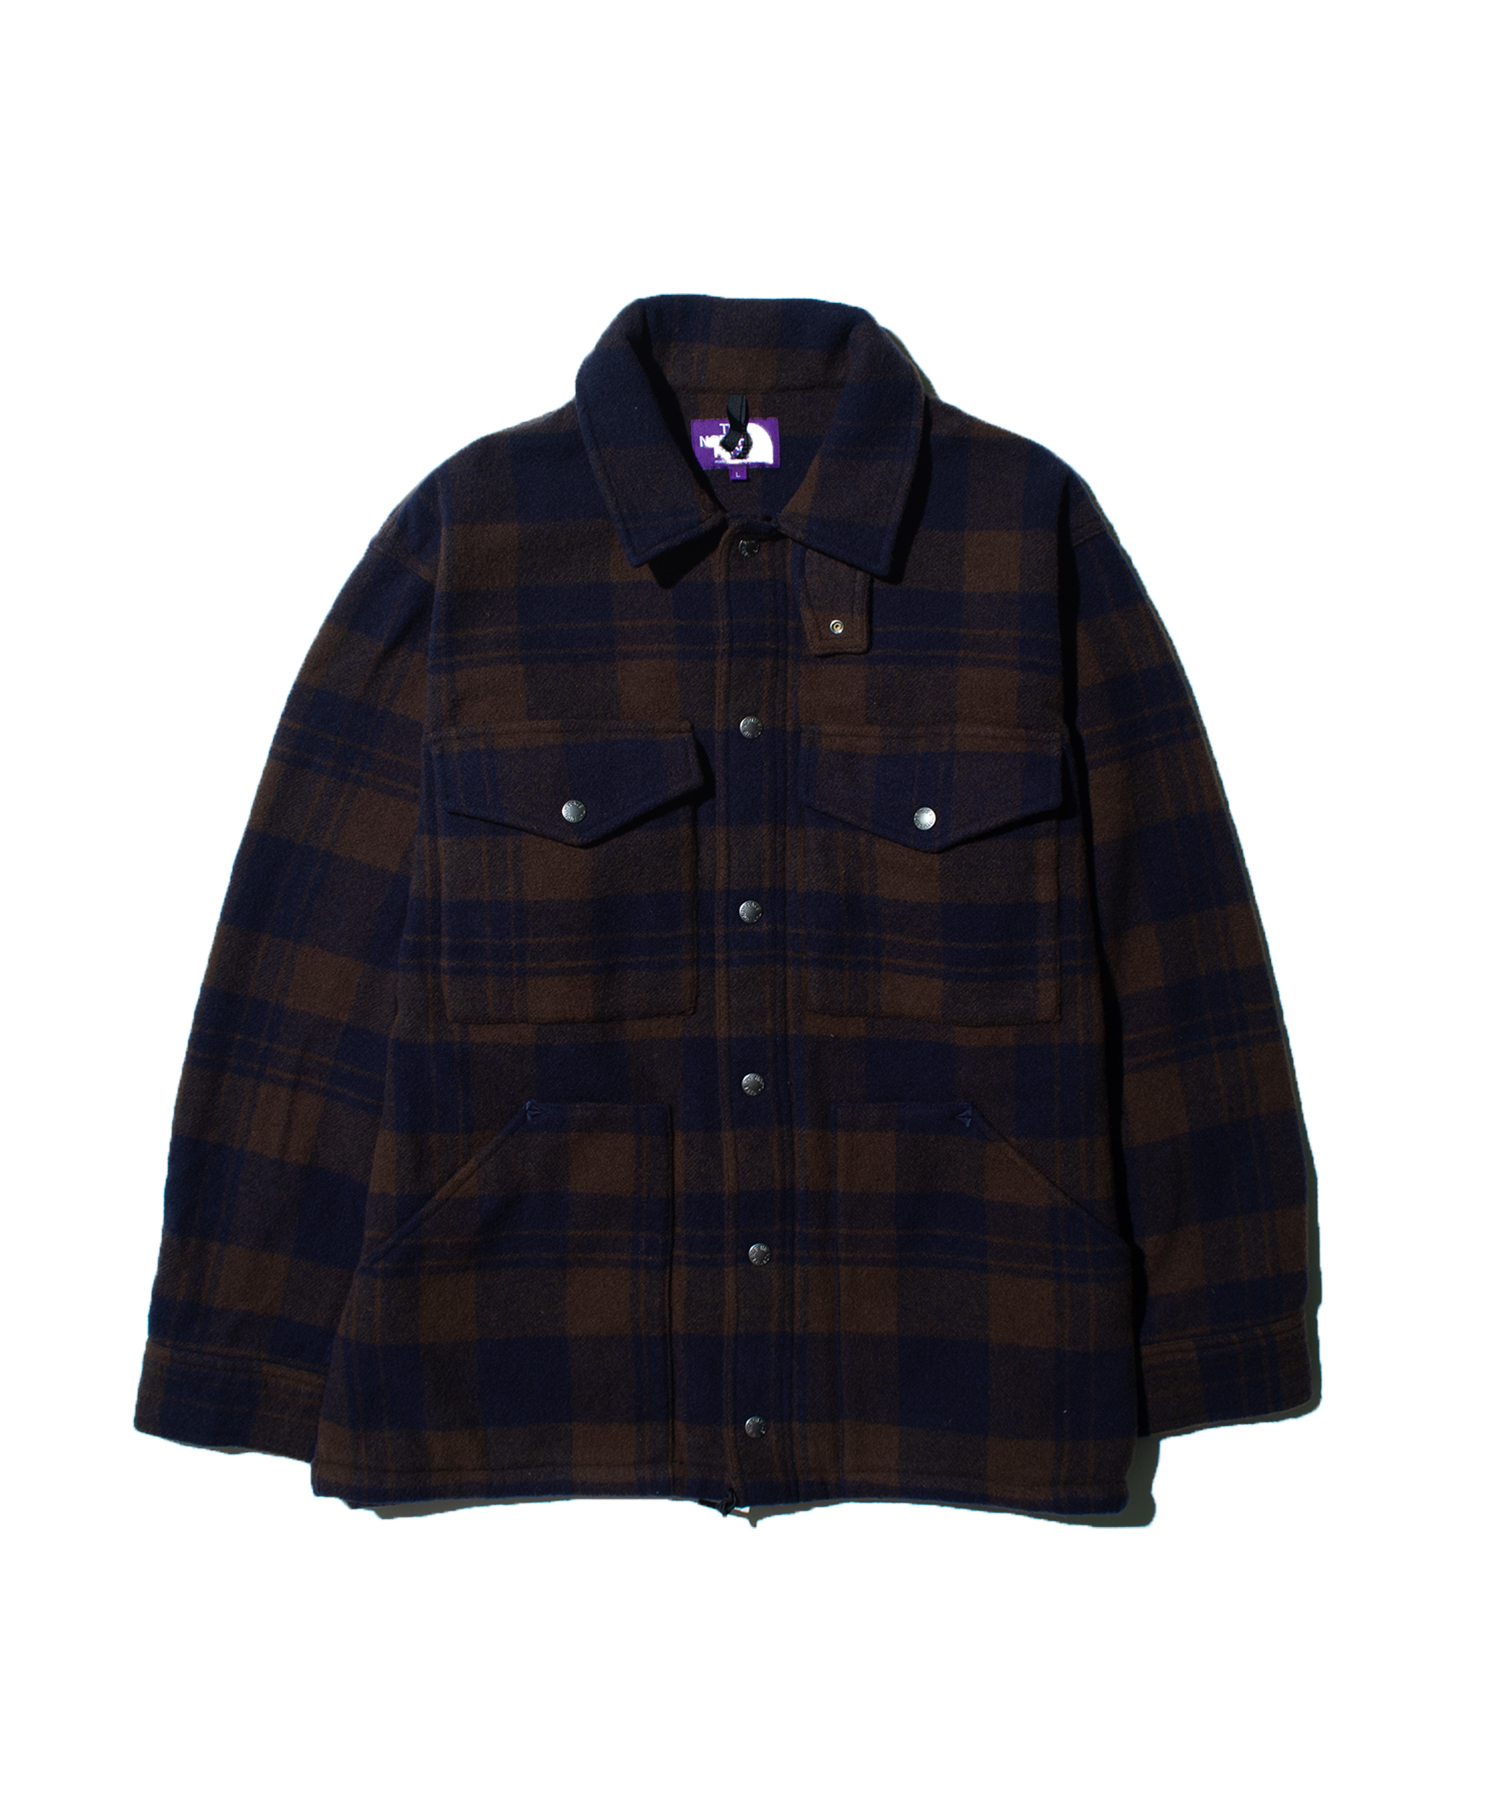 THE NORTH FACE PURPLE LABEL Wool Field CPO Jacket / ザ